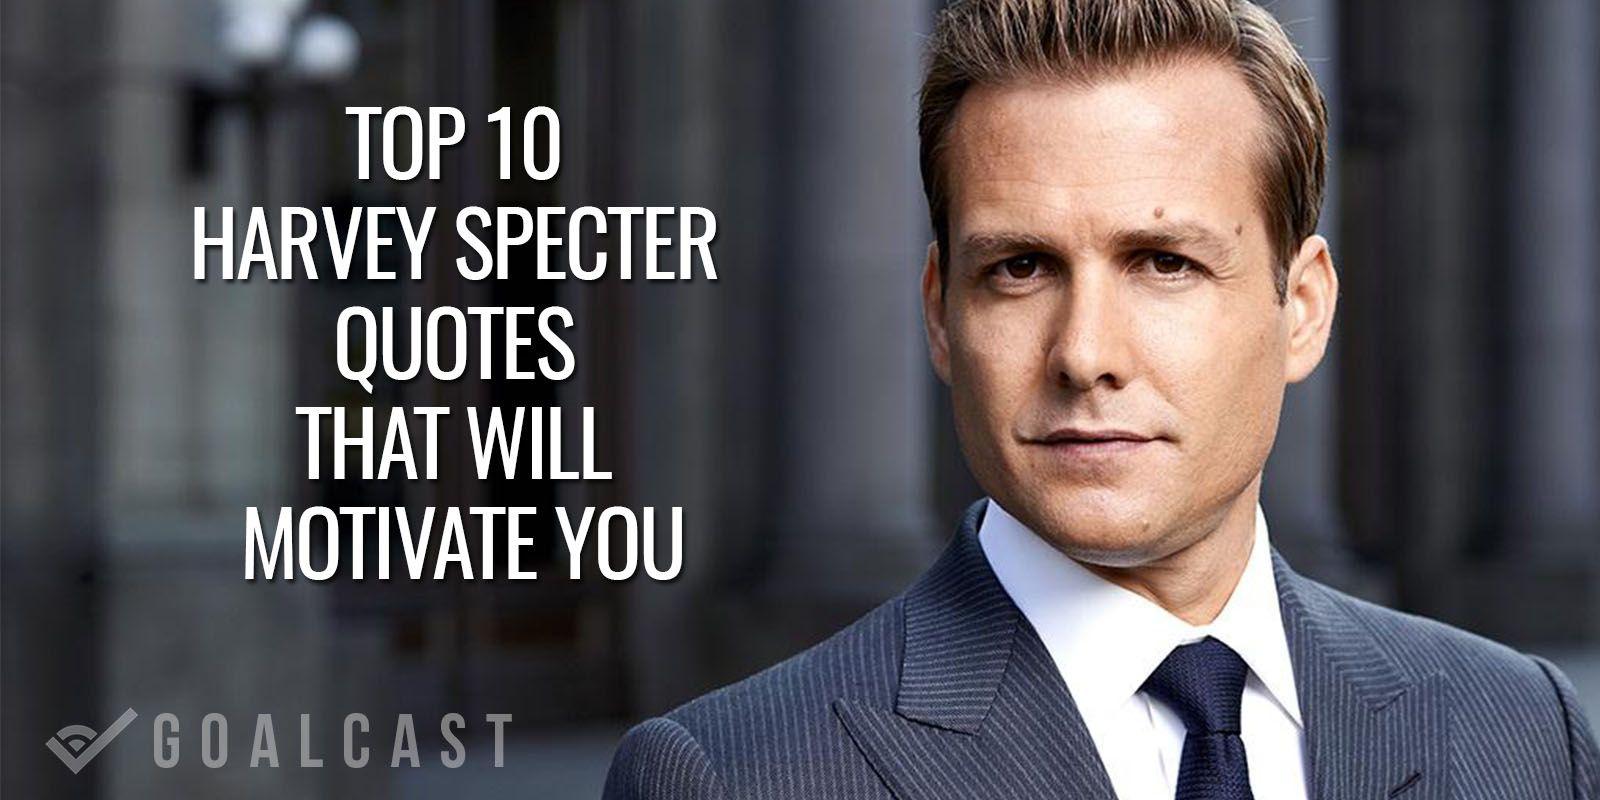 Pin on Harvey Specter Quotes  Suits